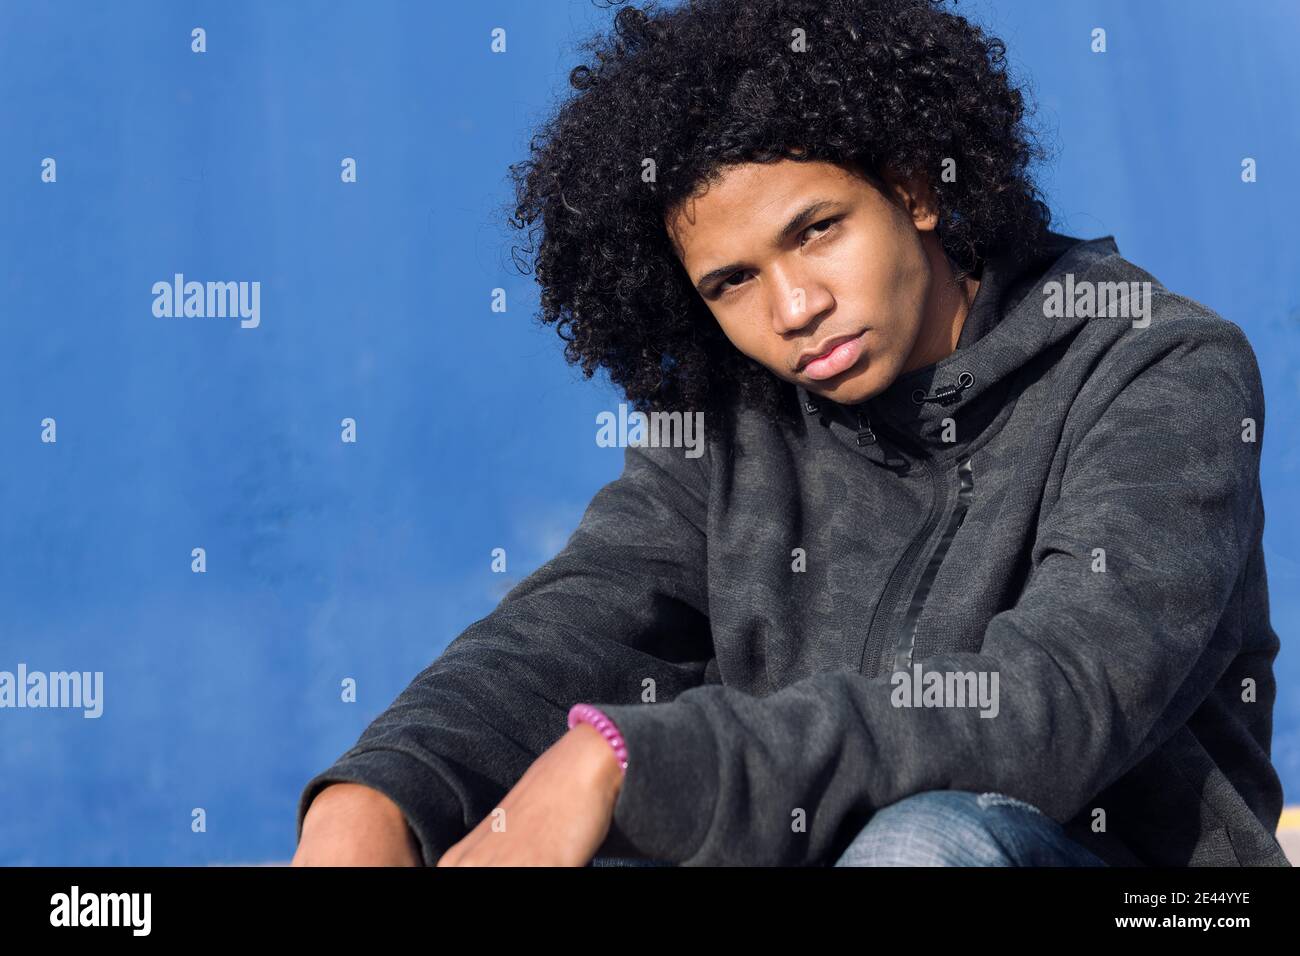 Thoughtful curly haired black male teenager in informal wear looking at camera while sitting against blue wall on street Stock Photo